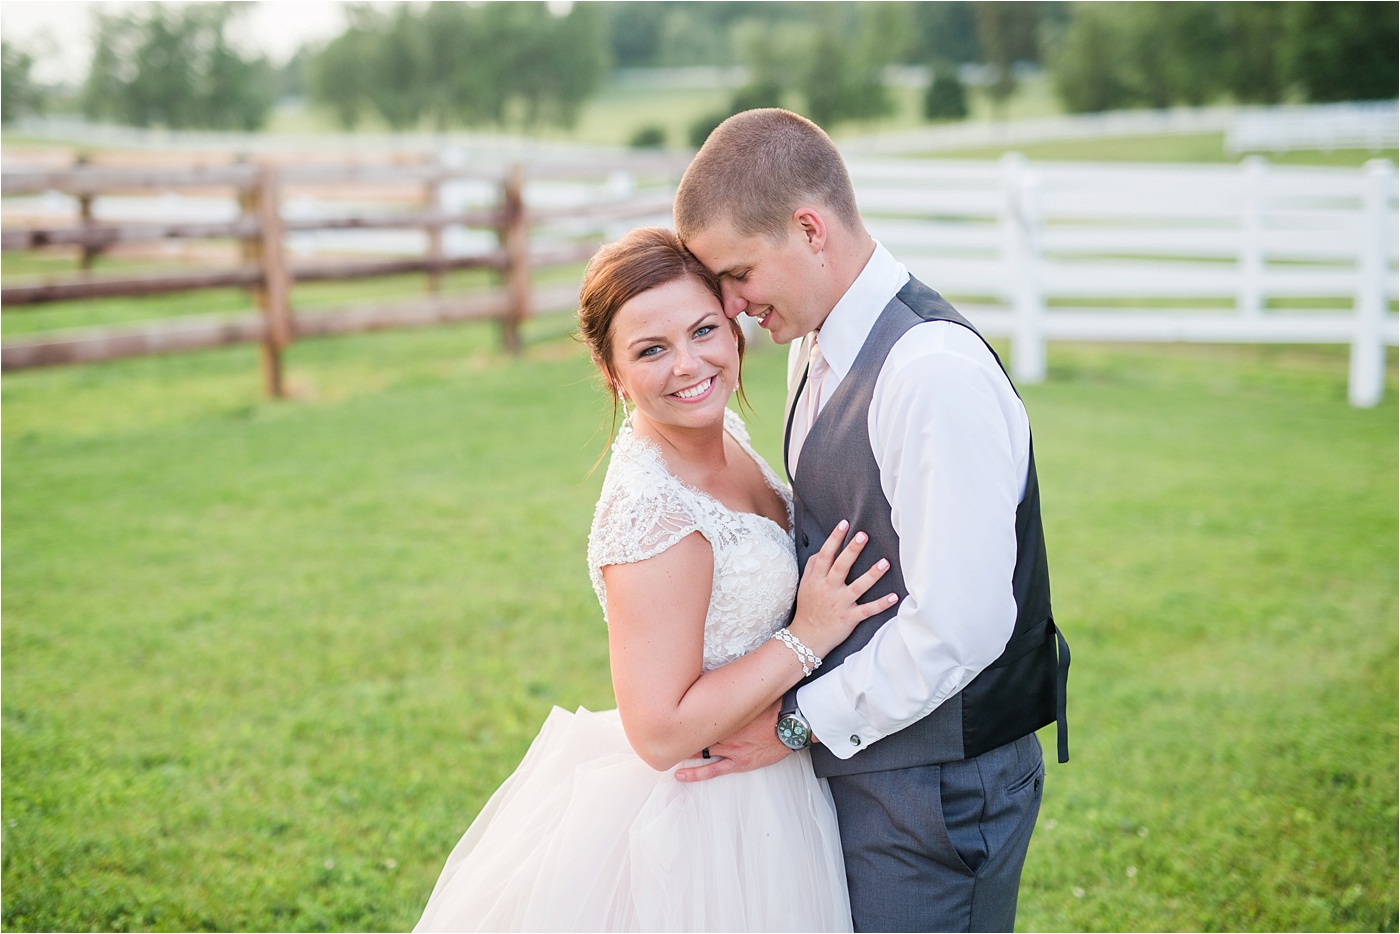 A Blush Outdoor wedding at Irongate Equestrian | KariMe Photography_0185